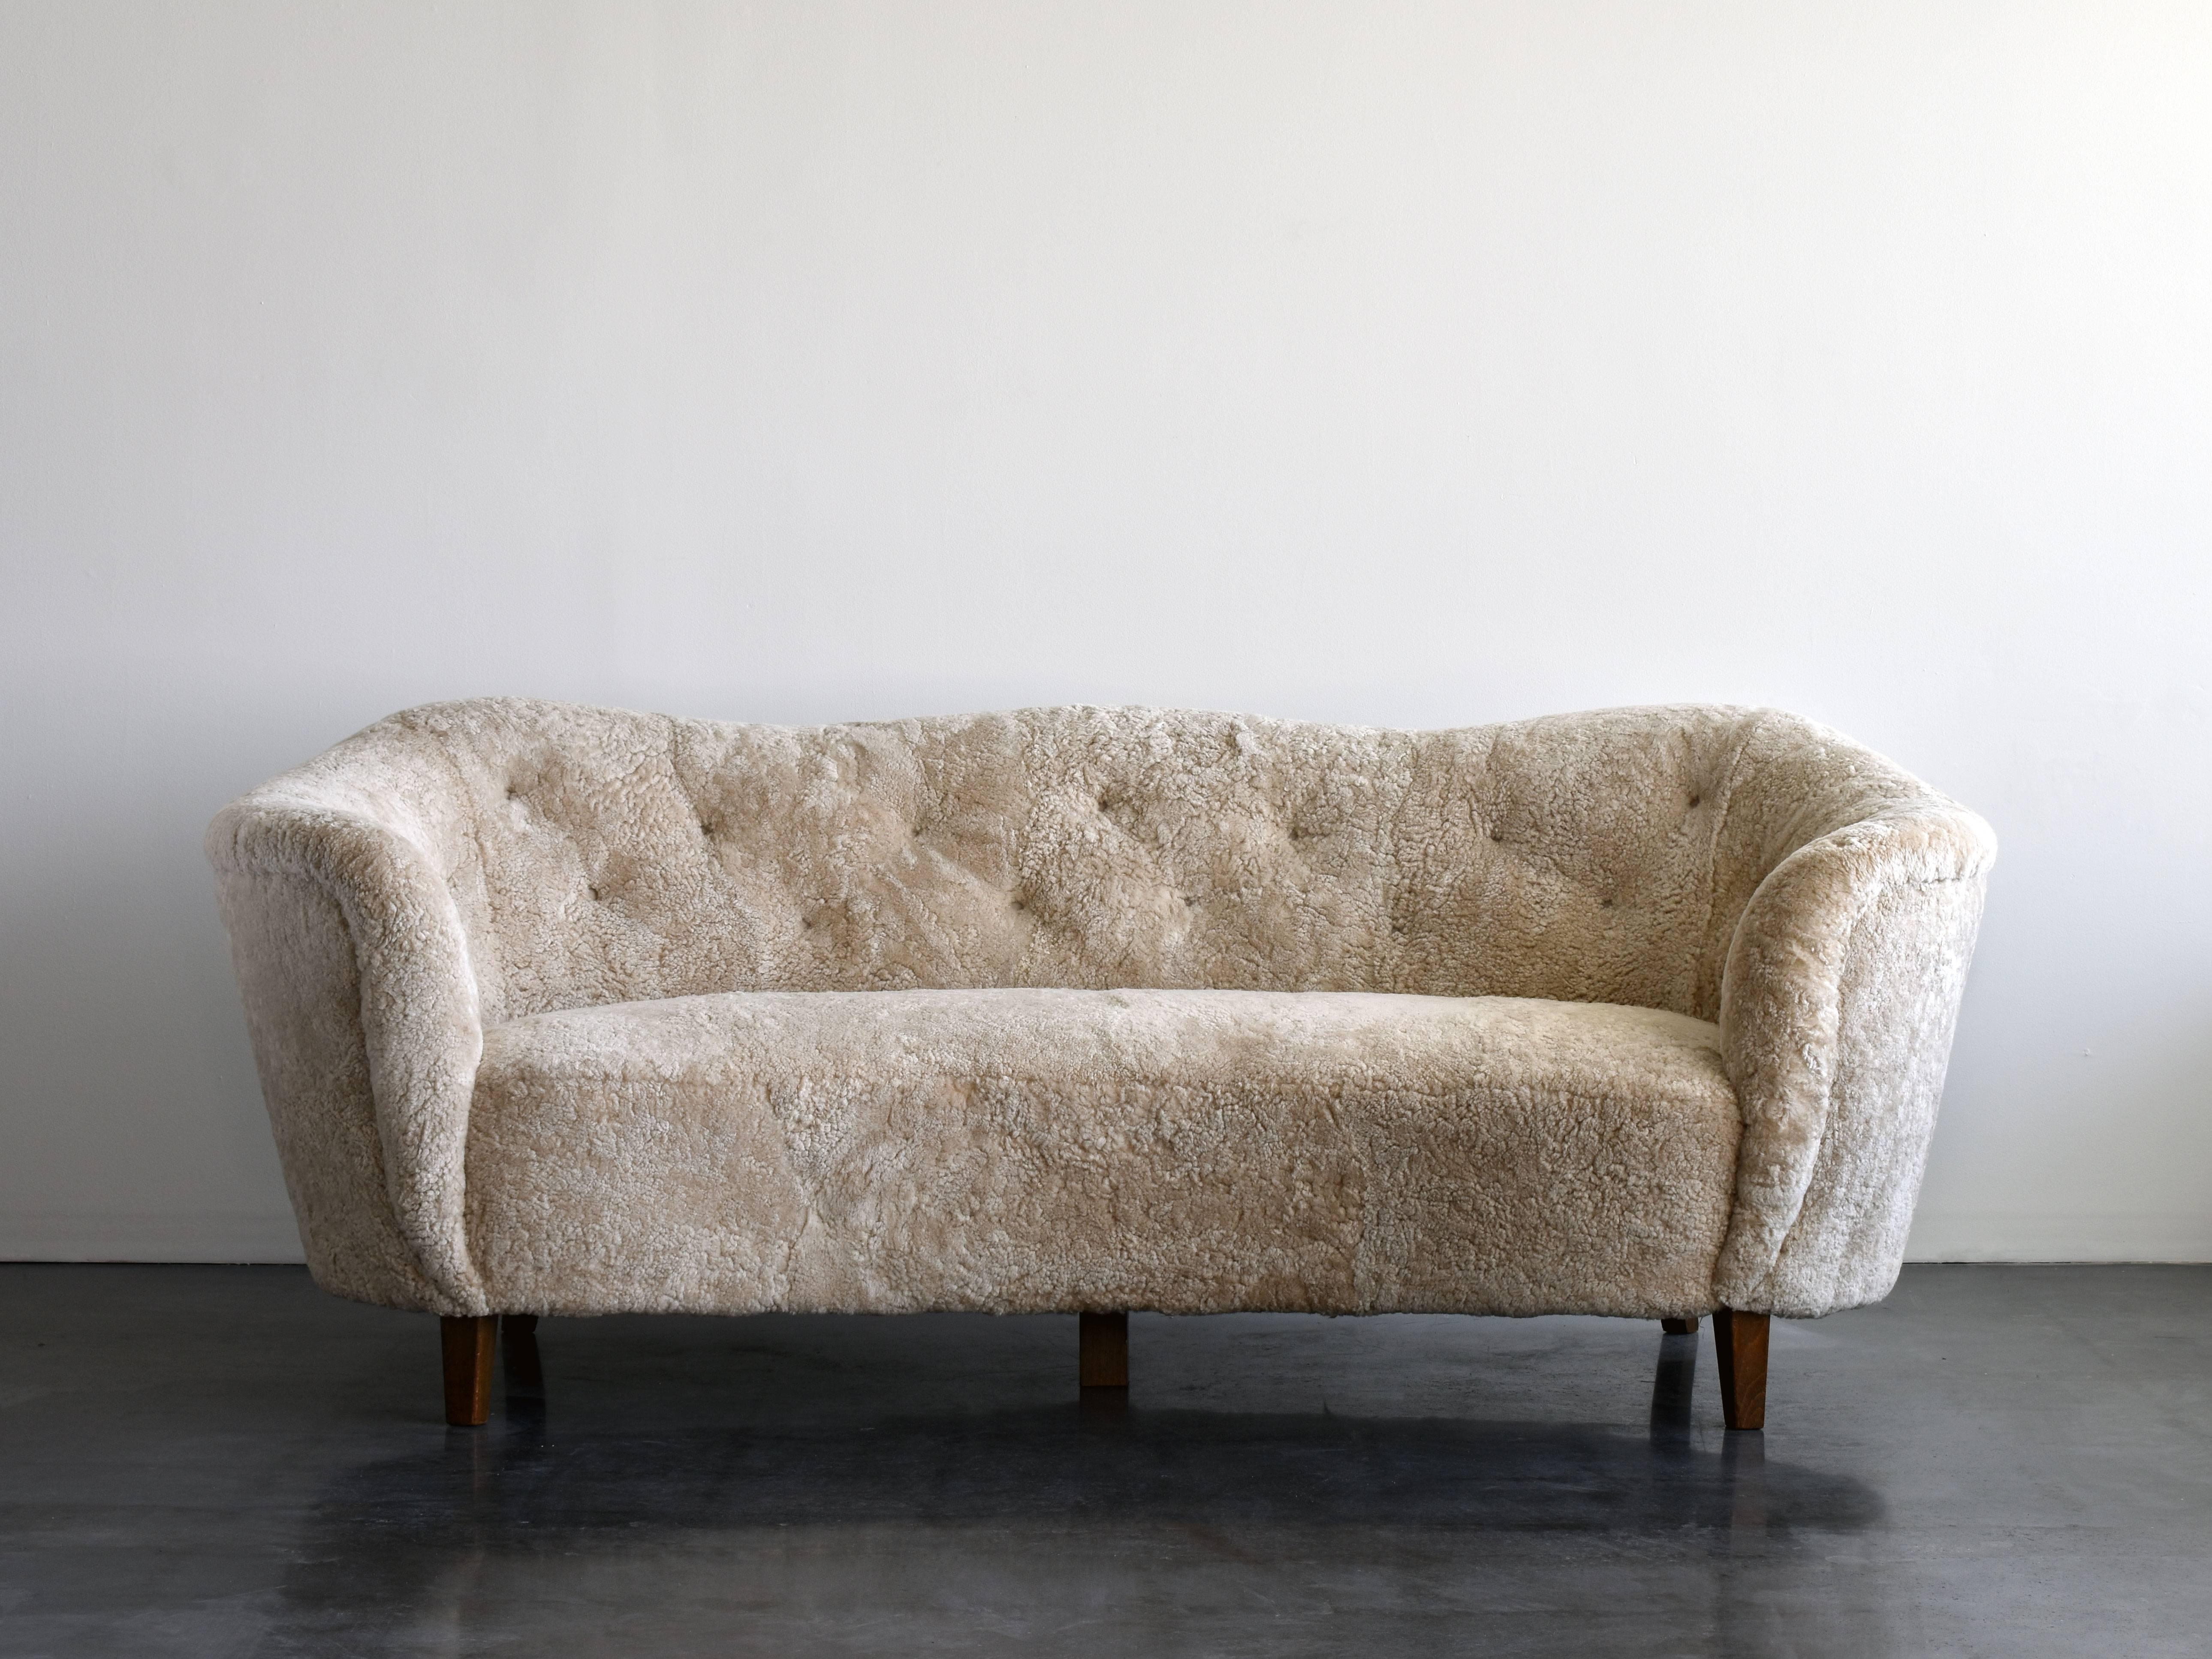 An early Danish modernist sofa with an organic form similar to works by important architects such as Viggo Boesen, Philip Arctander, Peder Moos and Flemming and Mogens Lassen. Presumably manufactured by N,C. Christophersen, circa 1949, Denmark.

 